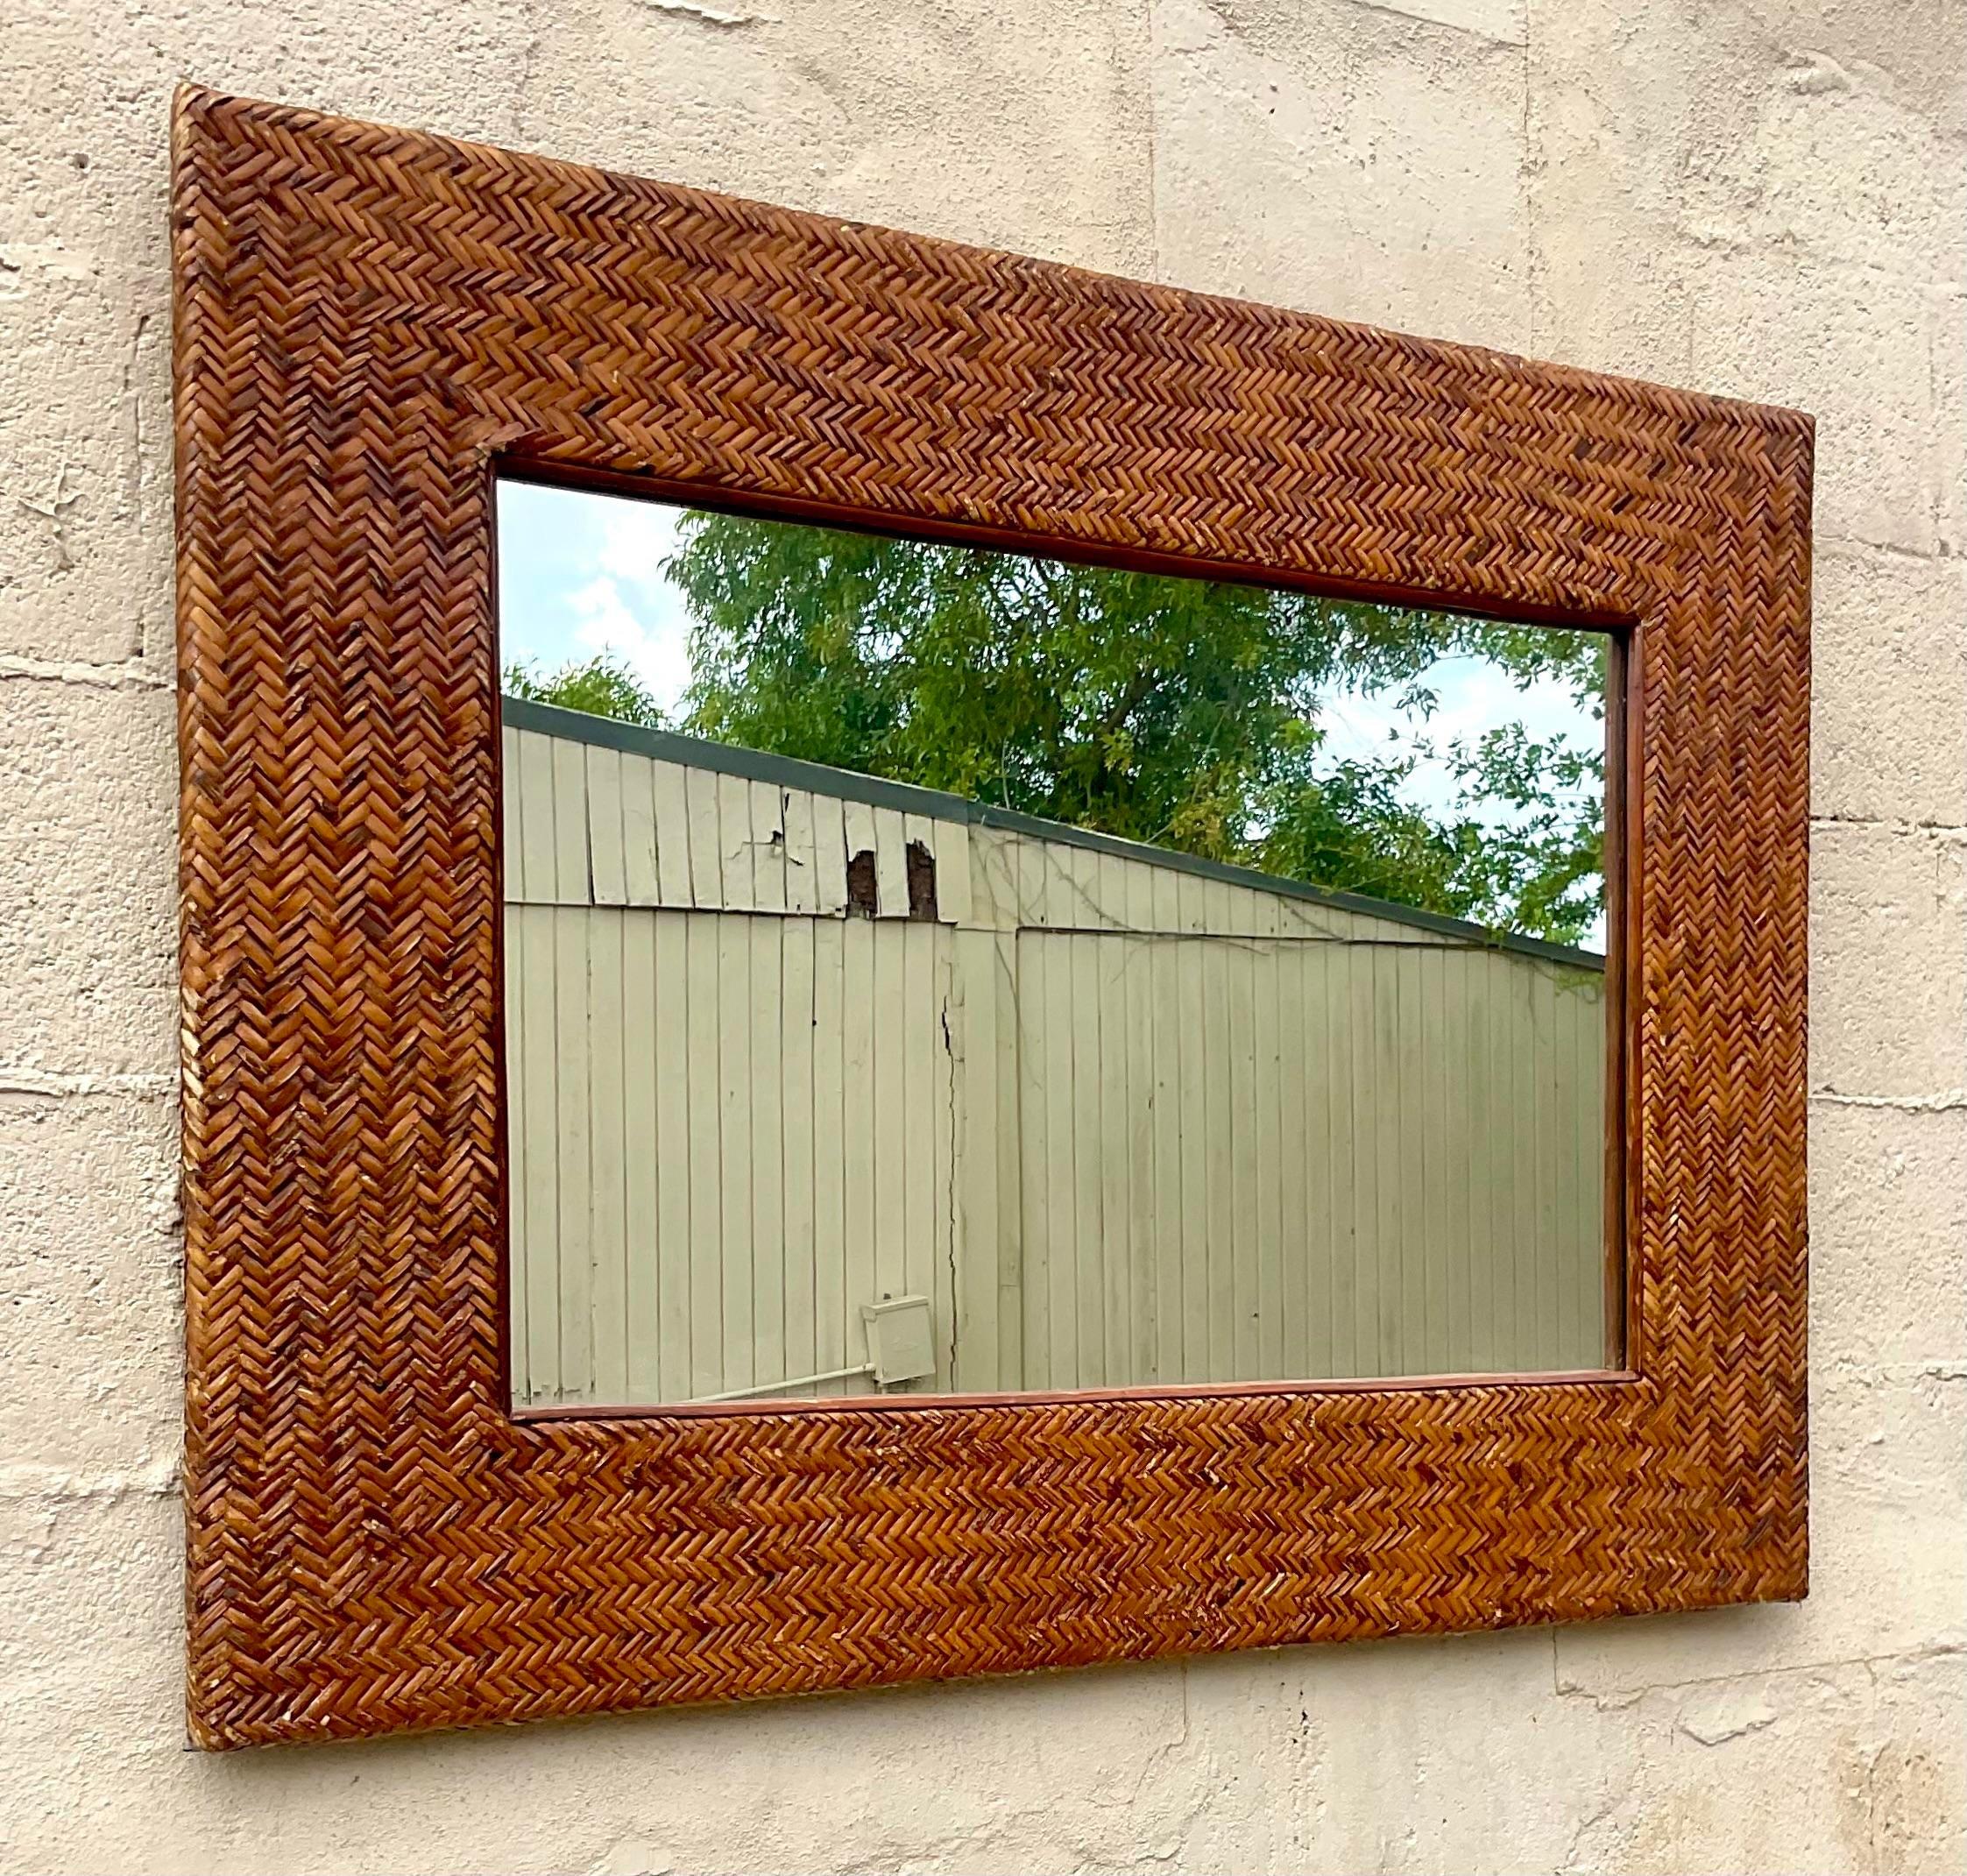 A fabulous vintage Coastal wall mirror. A chic woven rattan wide frame in a beautiful herringbone weave. Acquired from a Palm Beach estate. 